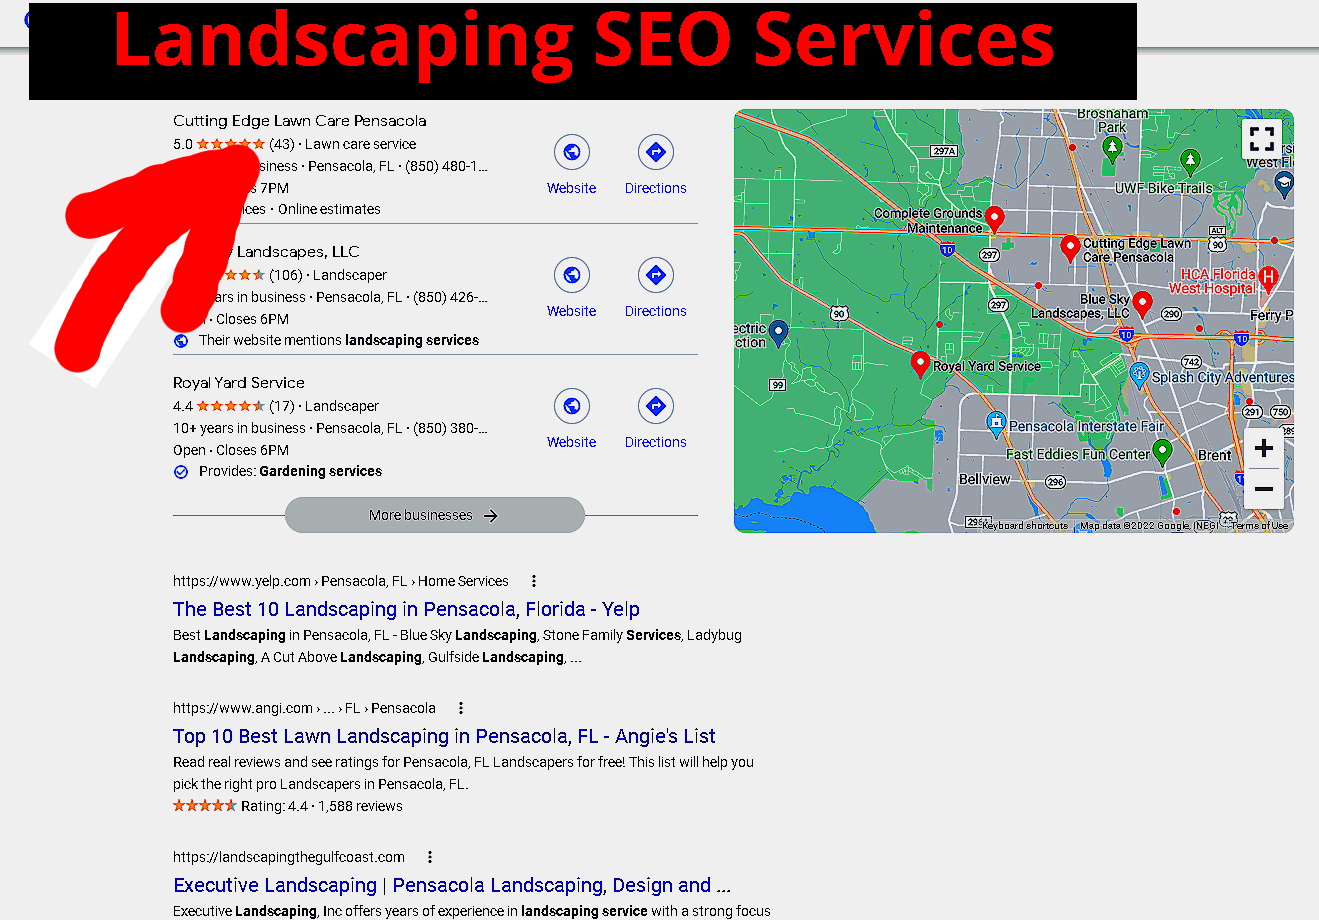 Landscaping SEO Services